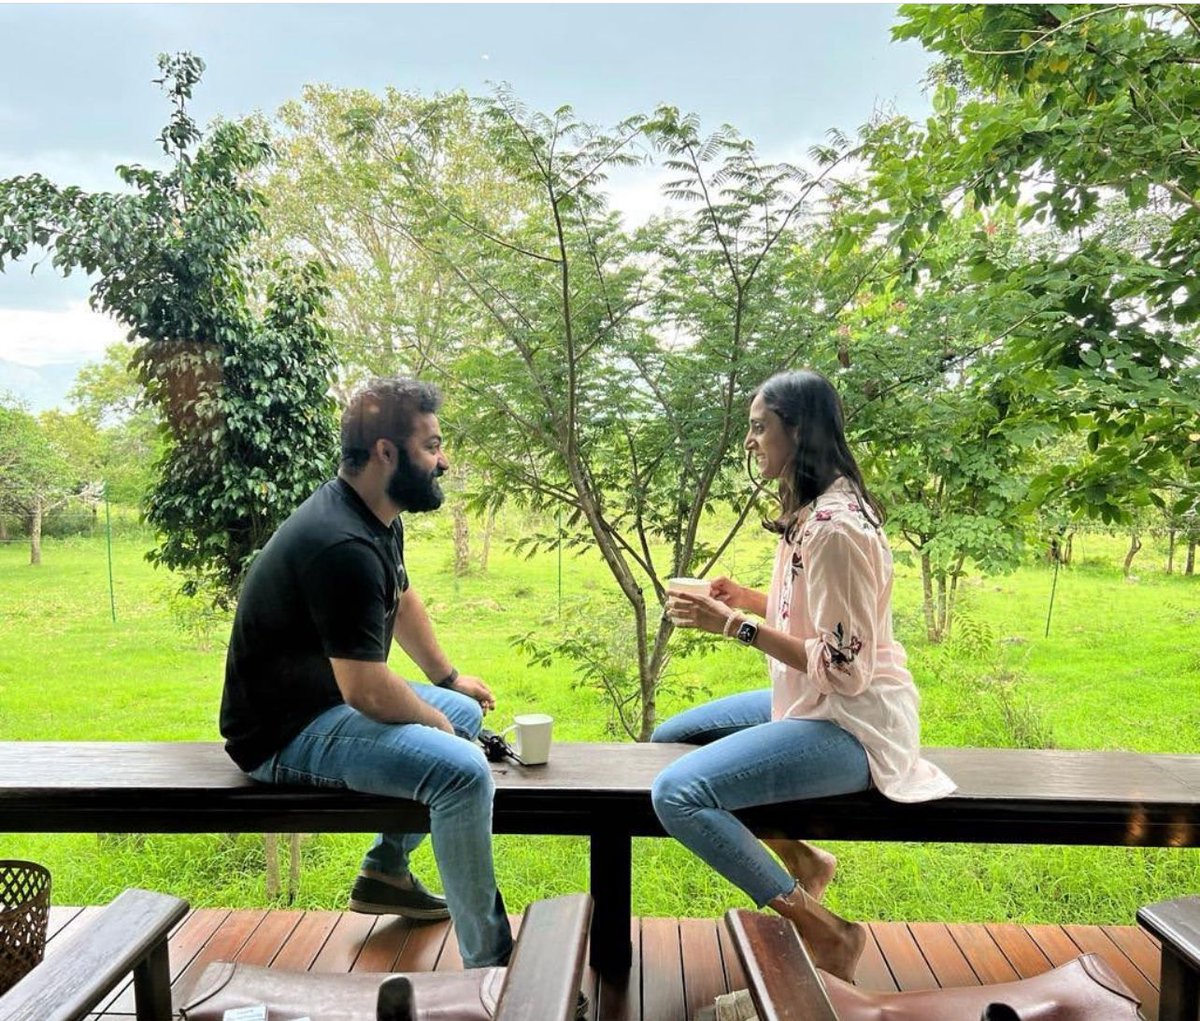 What do you think they're talking about? 😍

#JrNTR #Tarak #Tollywood #TollywoodActor #LakshmiPranathi #VacationVibes